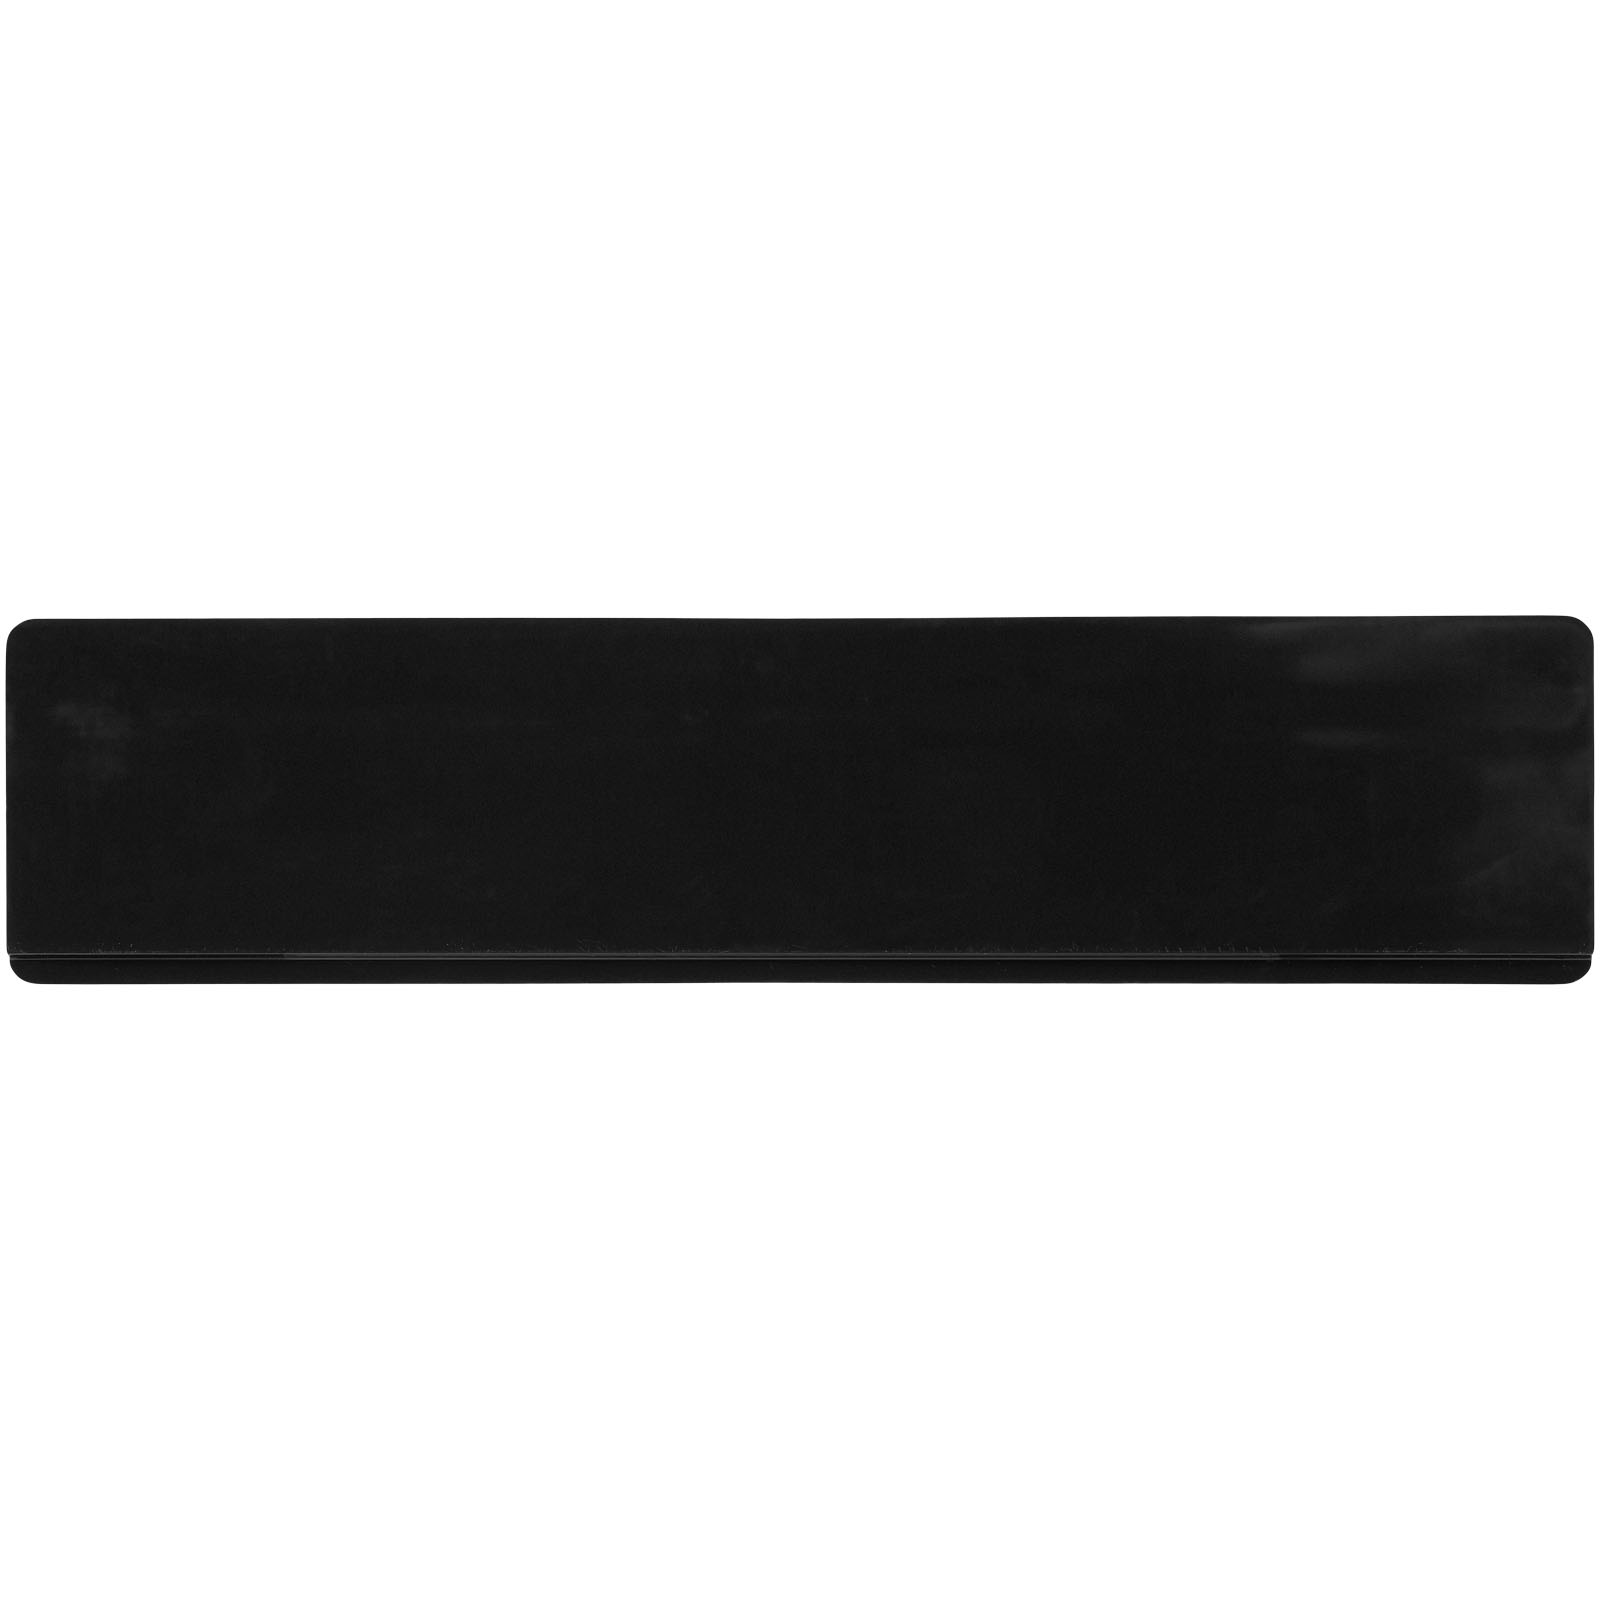 Advertising Desk Accessories - Terran 15 cm ruler from 100% recycled plastic - 2